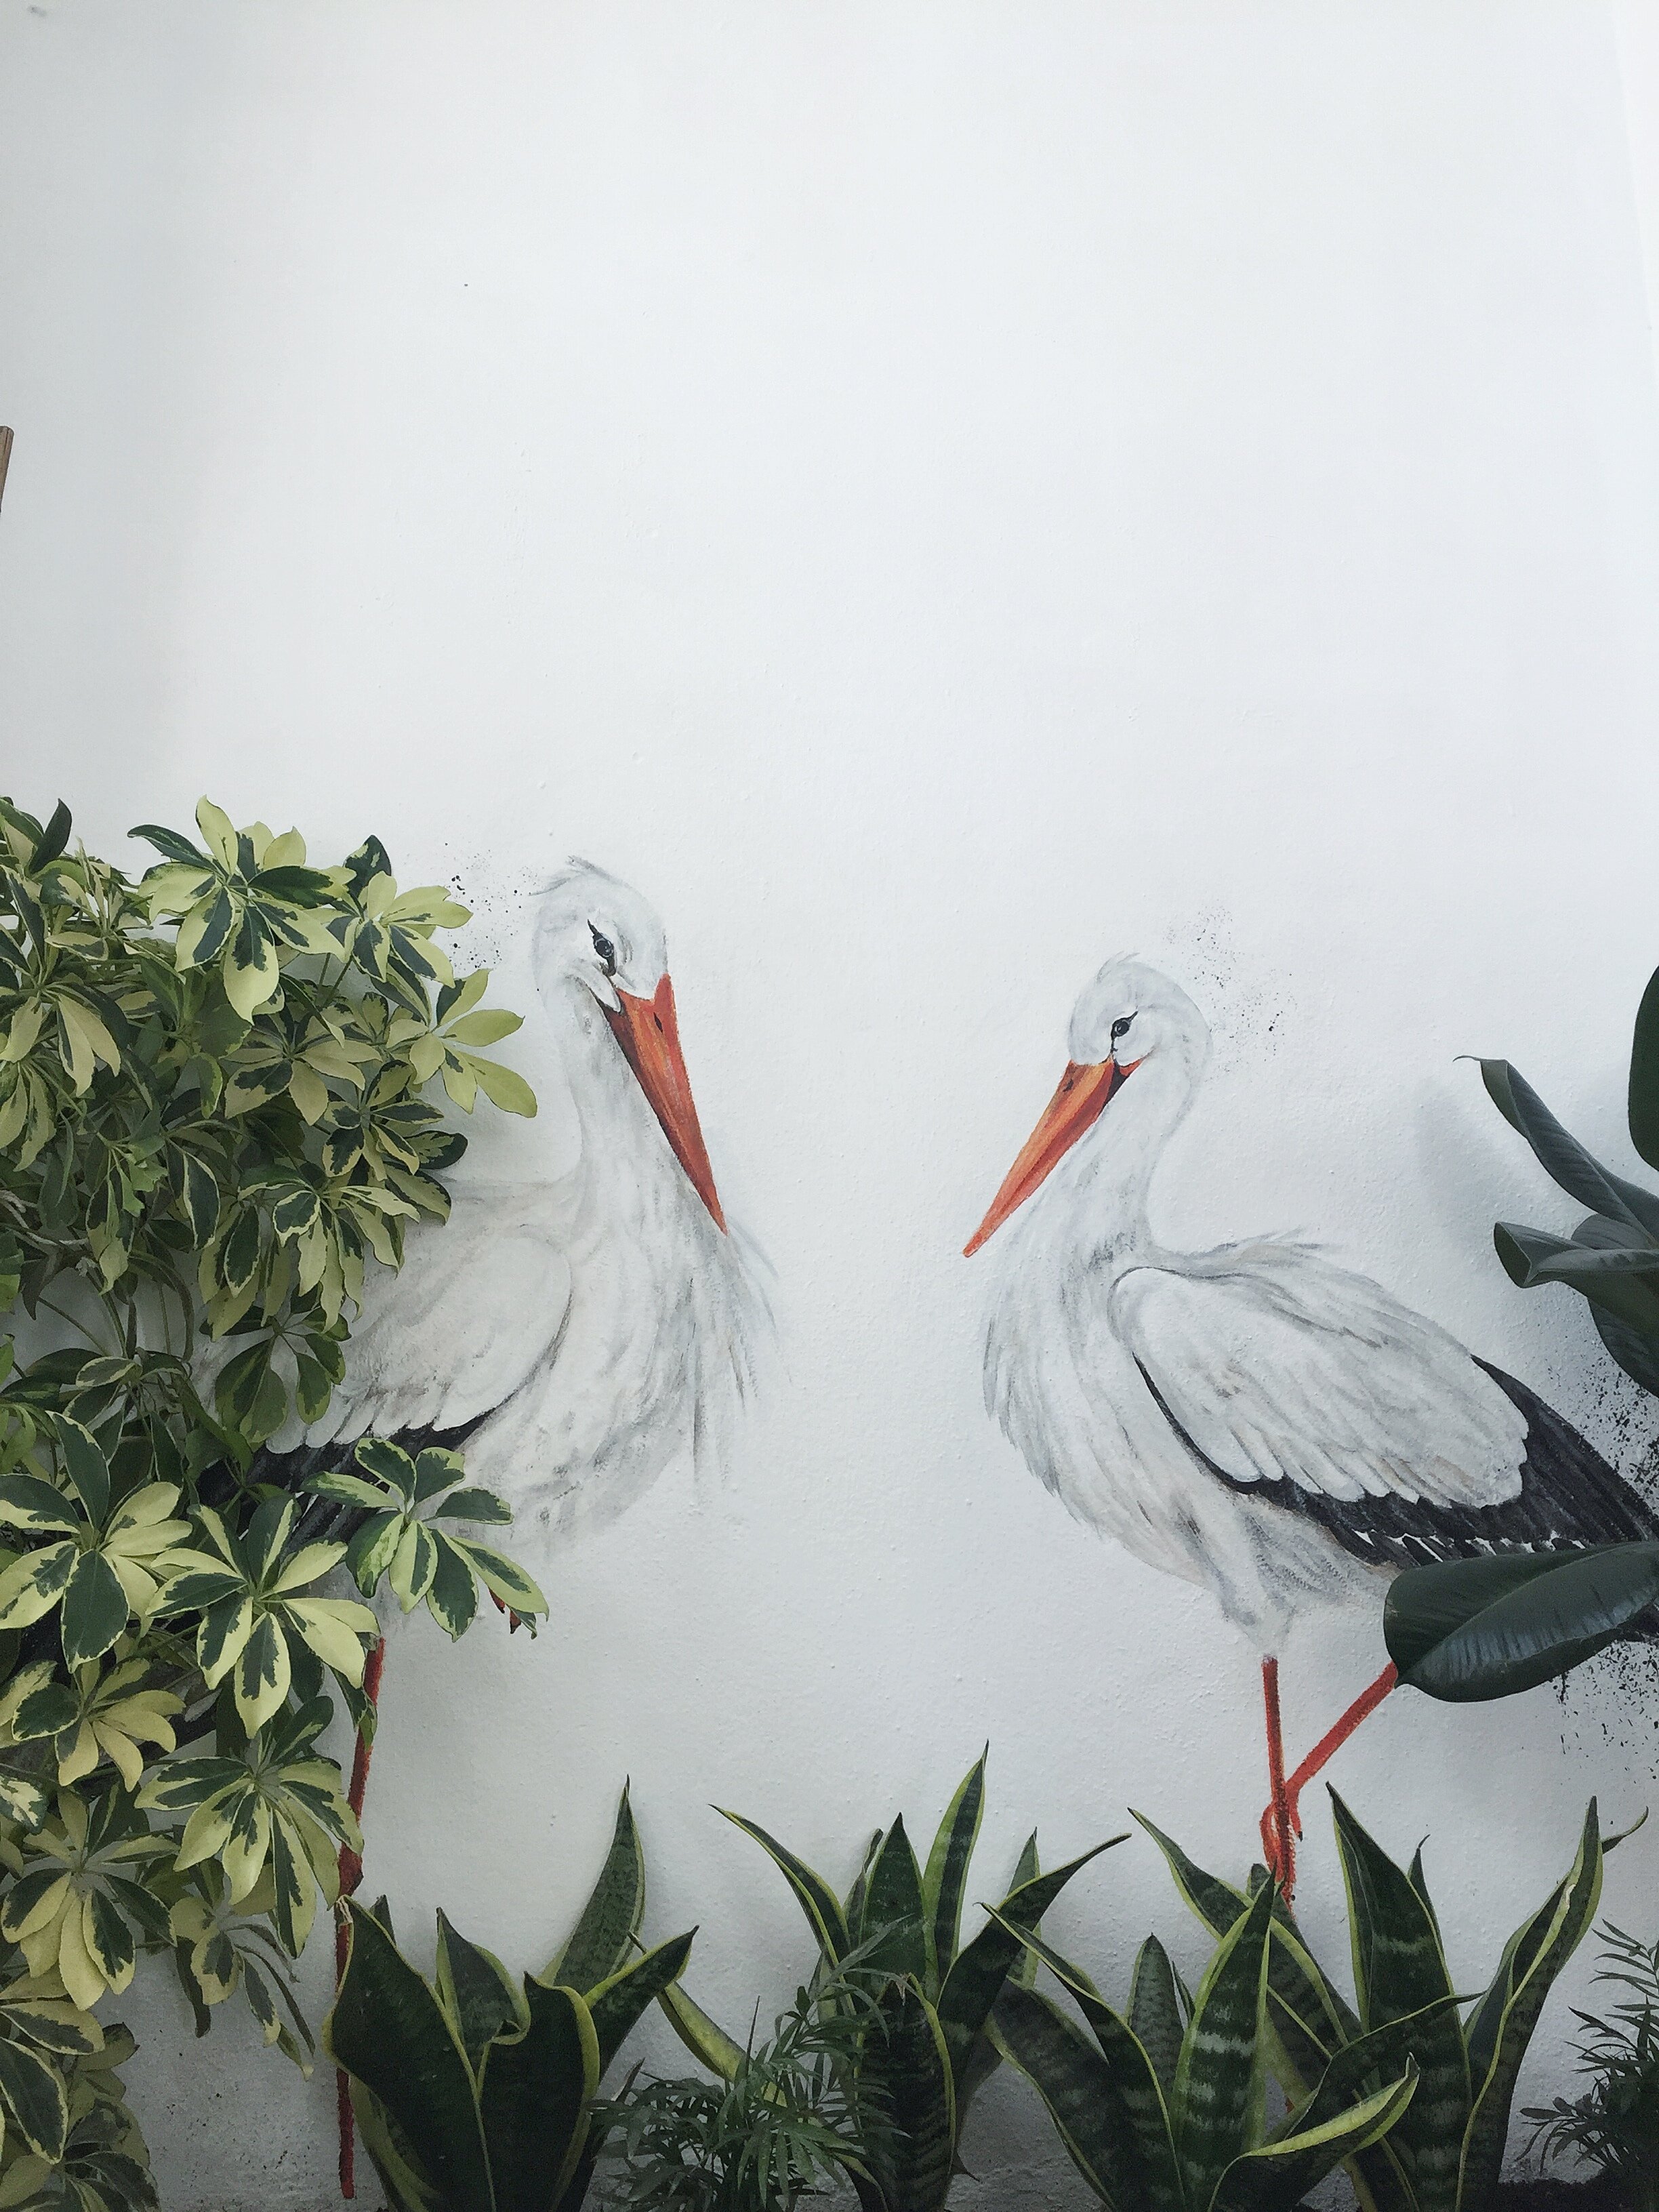  SUNRAY'S KITCHEN . The first birds to land on the walls of one of my favourite Lagos Café's, Sunray’s Kitchen 